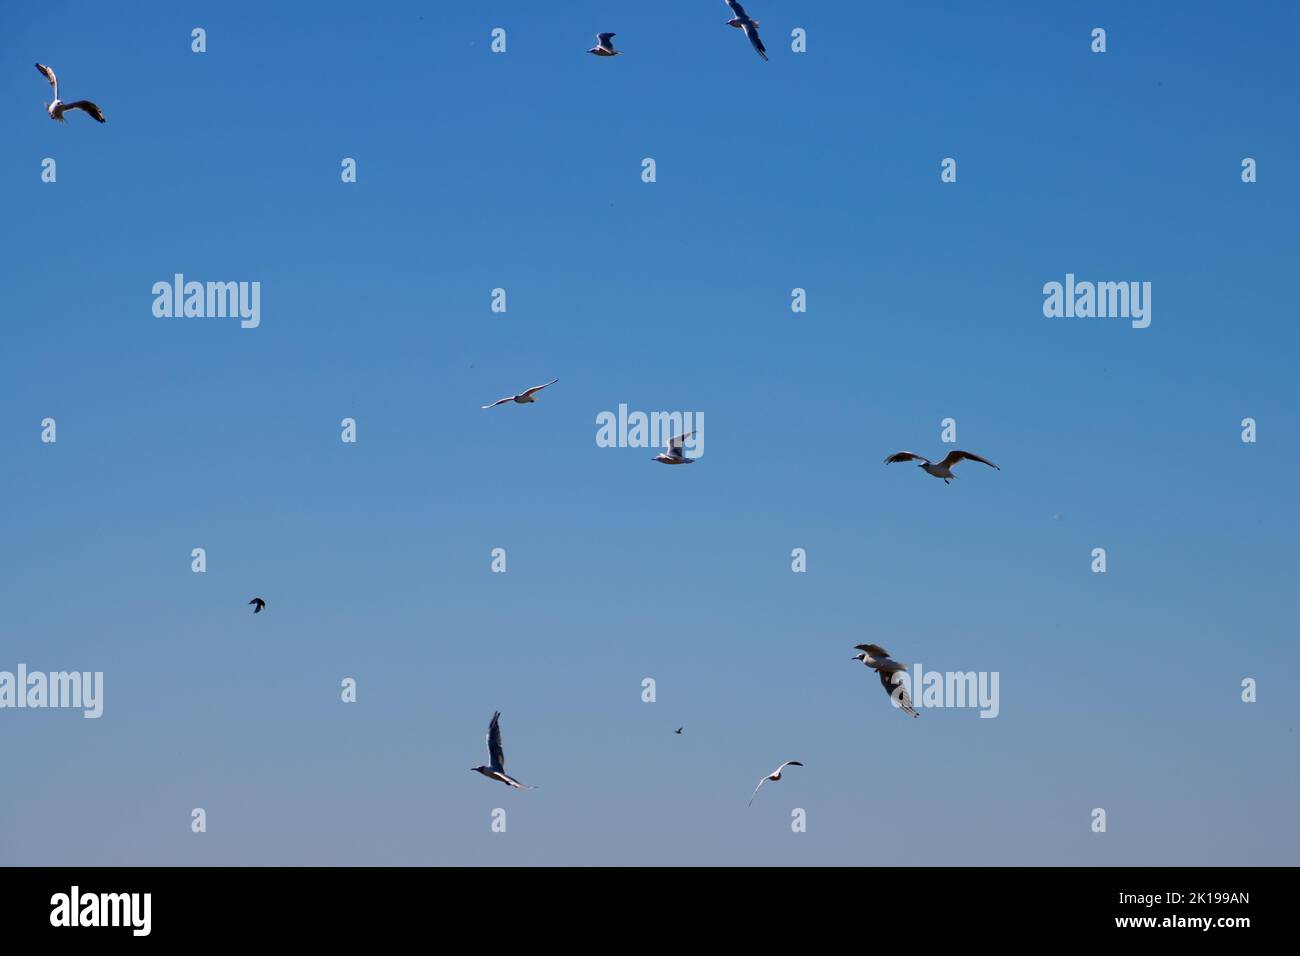 Flock of Seagulls flying on blue sky background Stock Photo